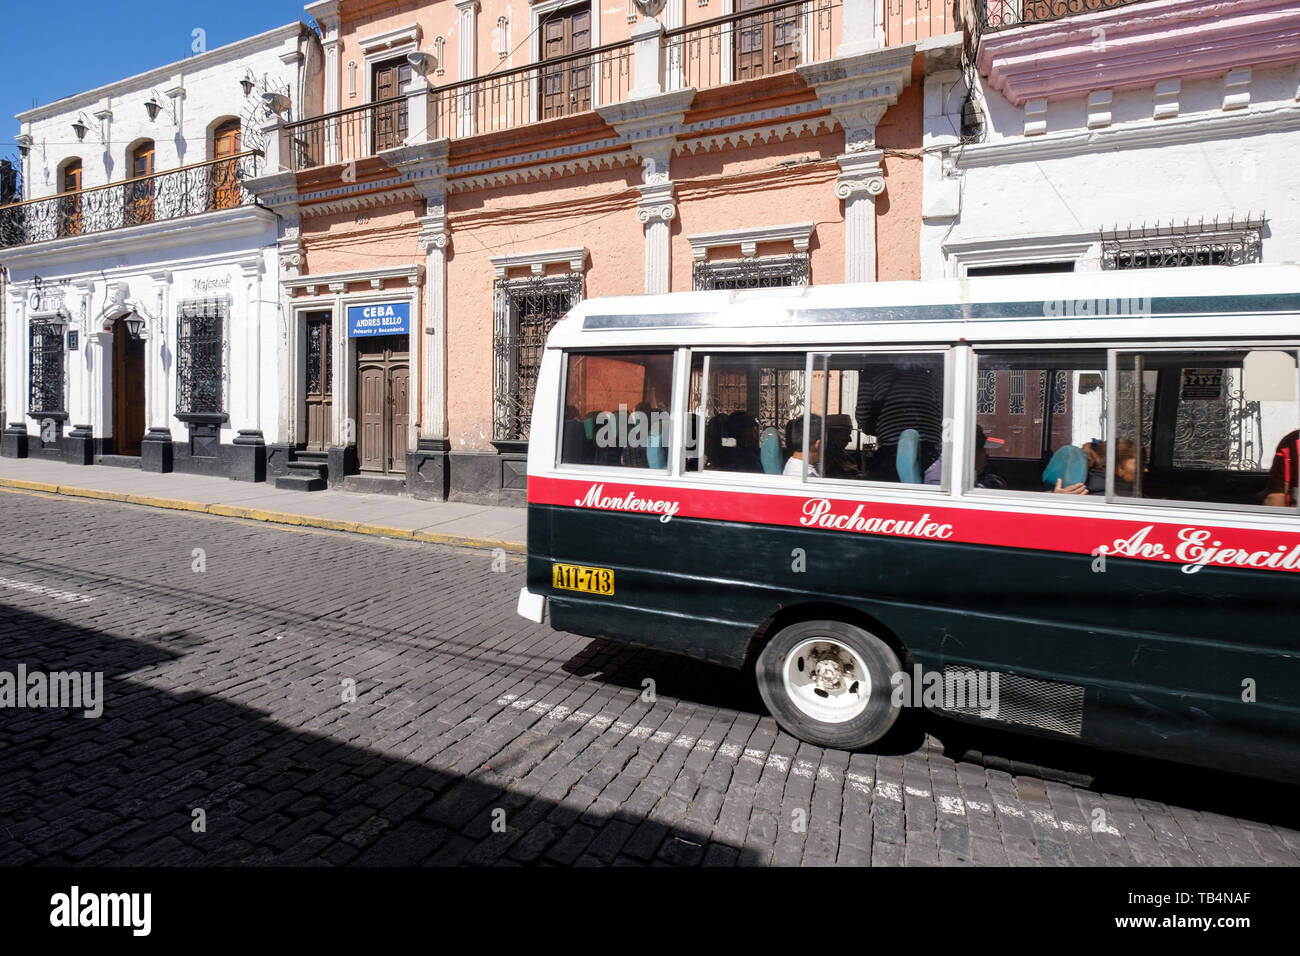 A public bus or colectivo on the streets of Arequipa, Peru Stock Photo